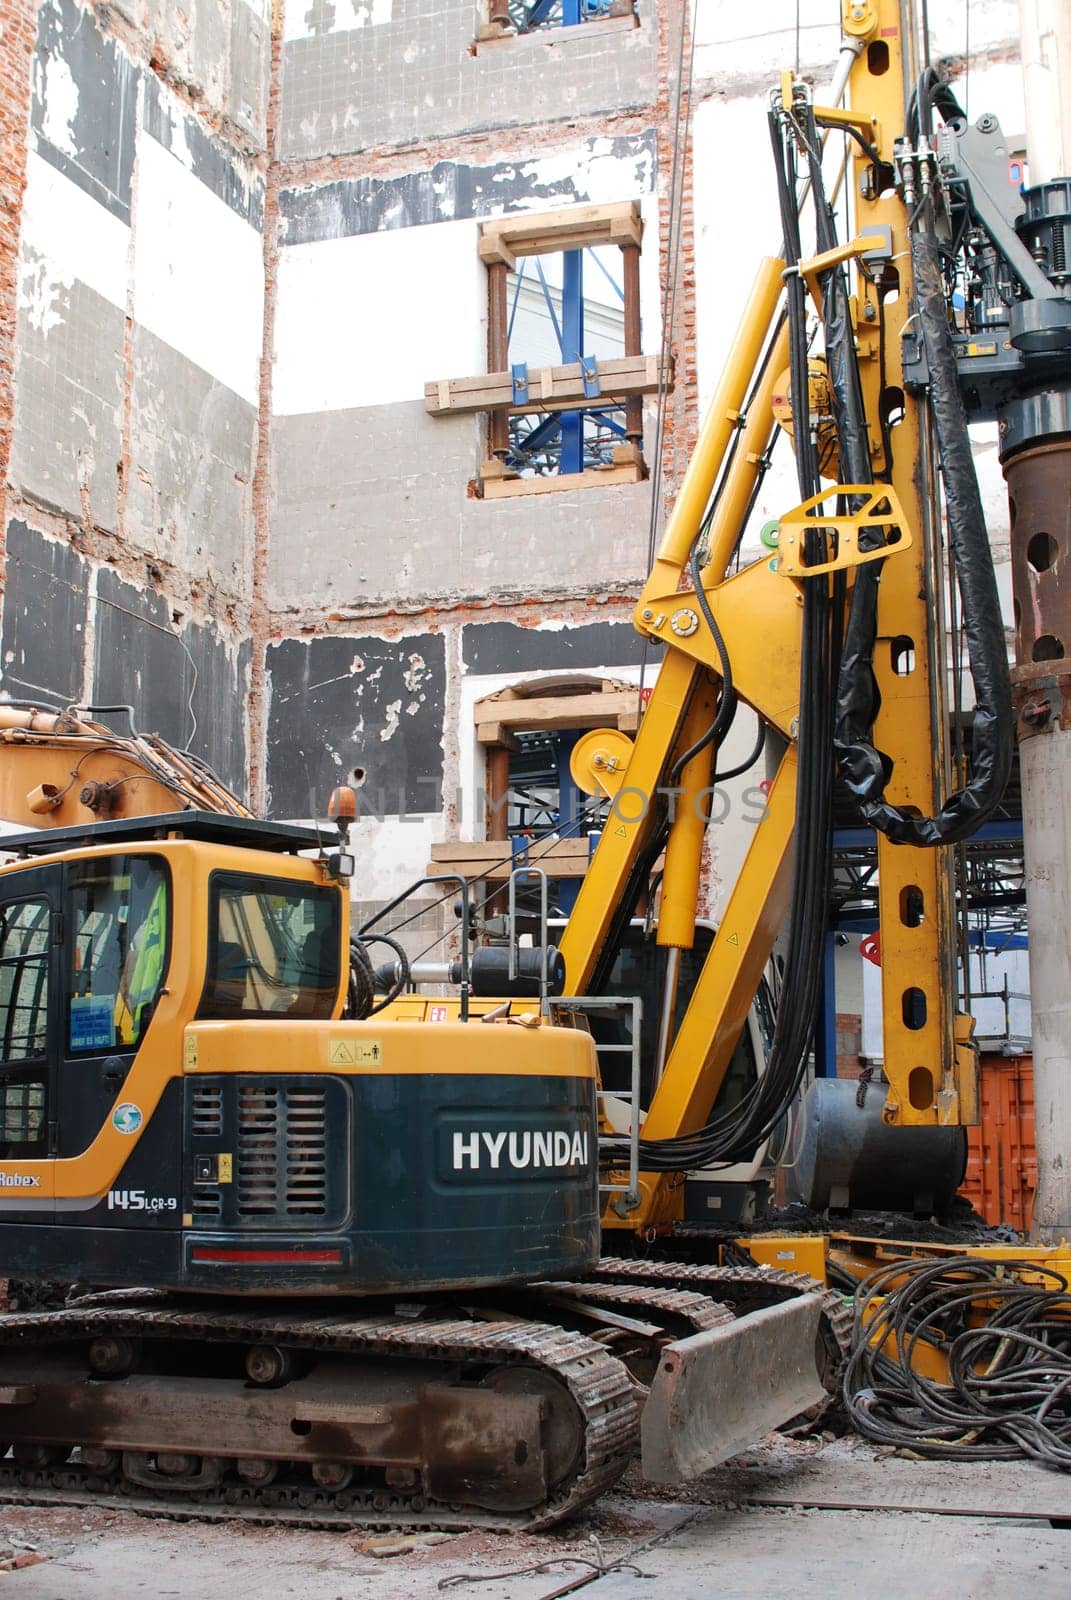 Yellow excavator from Hyundai inside a demolition house in Hamburg at the inner Alster lake by rherrmannde